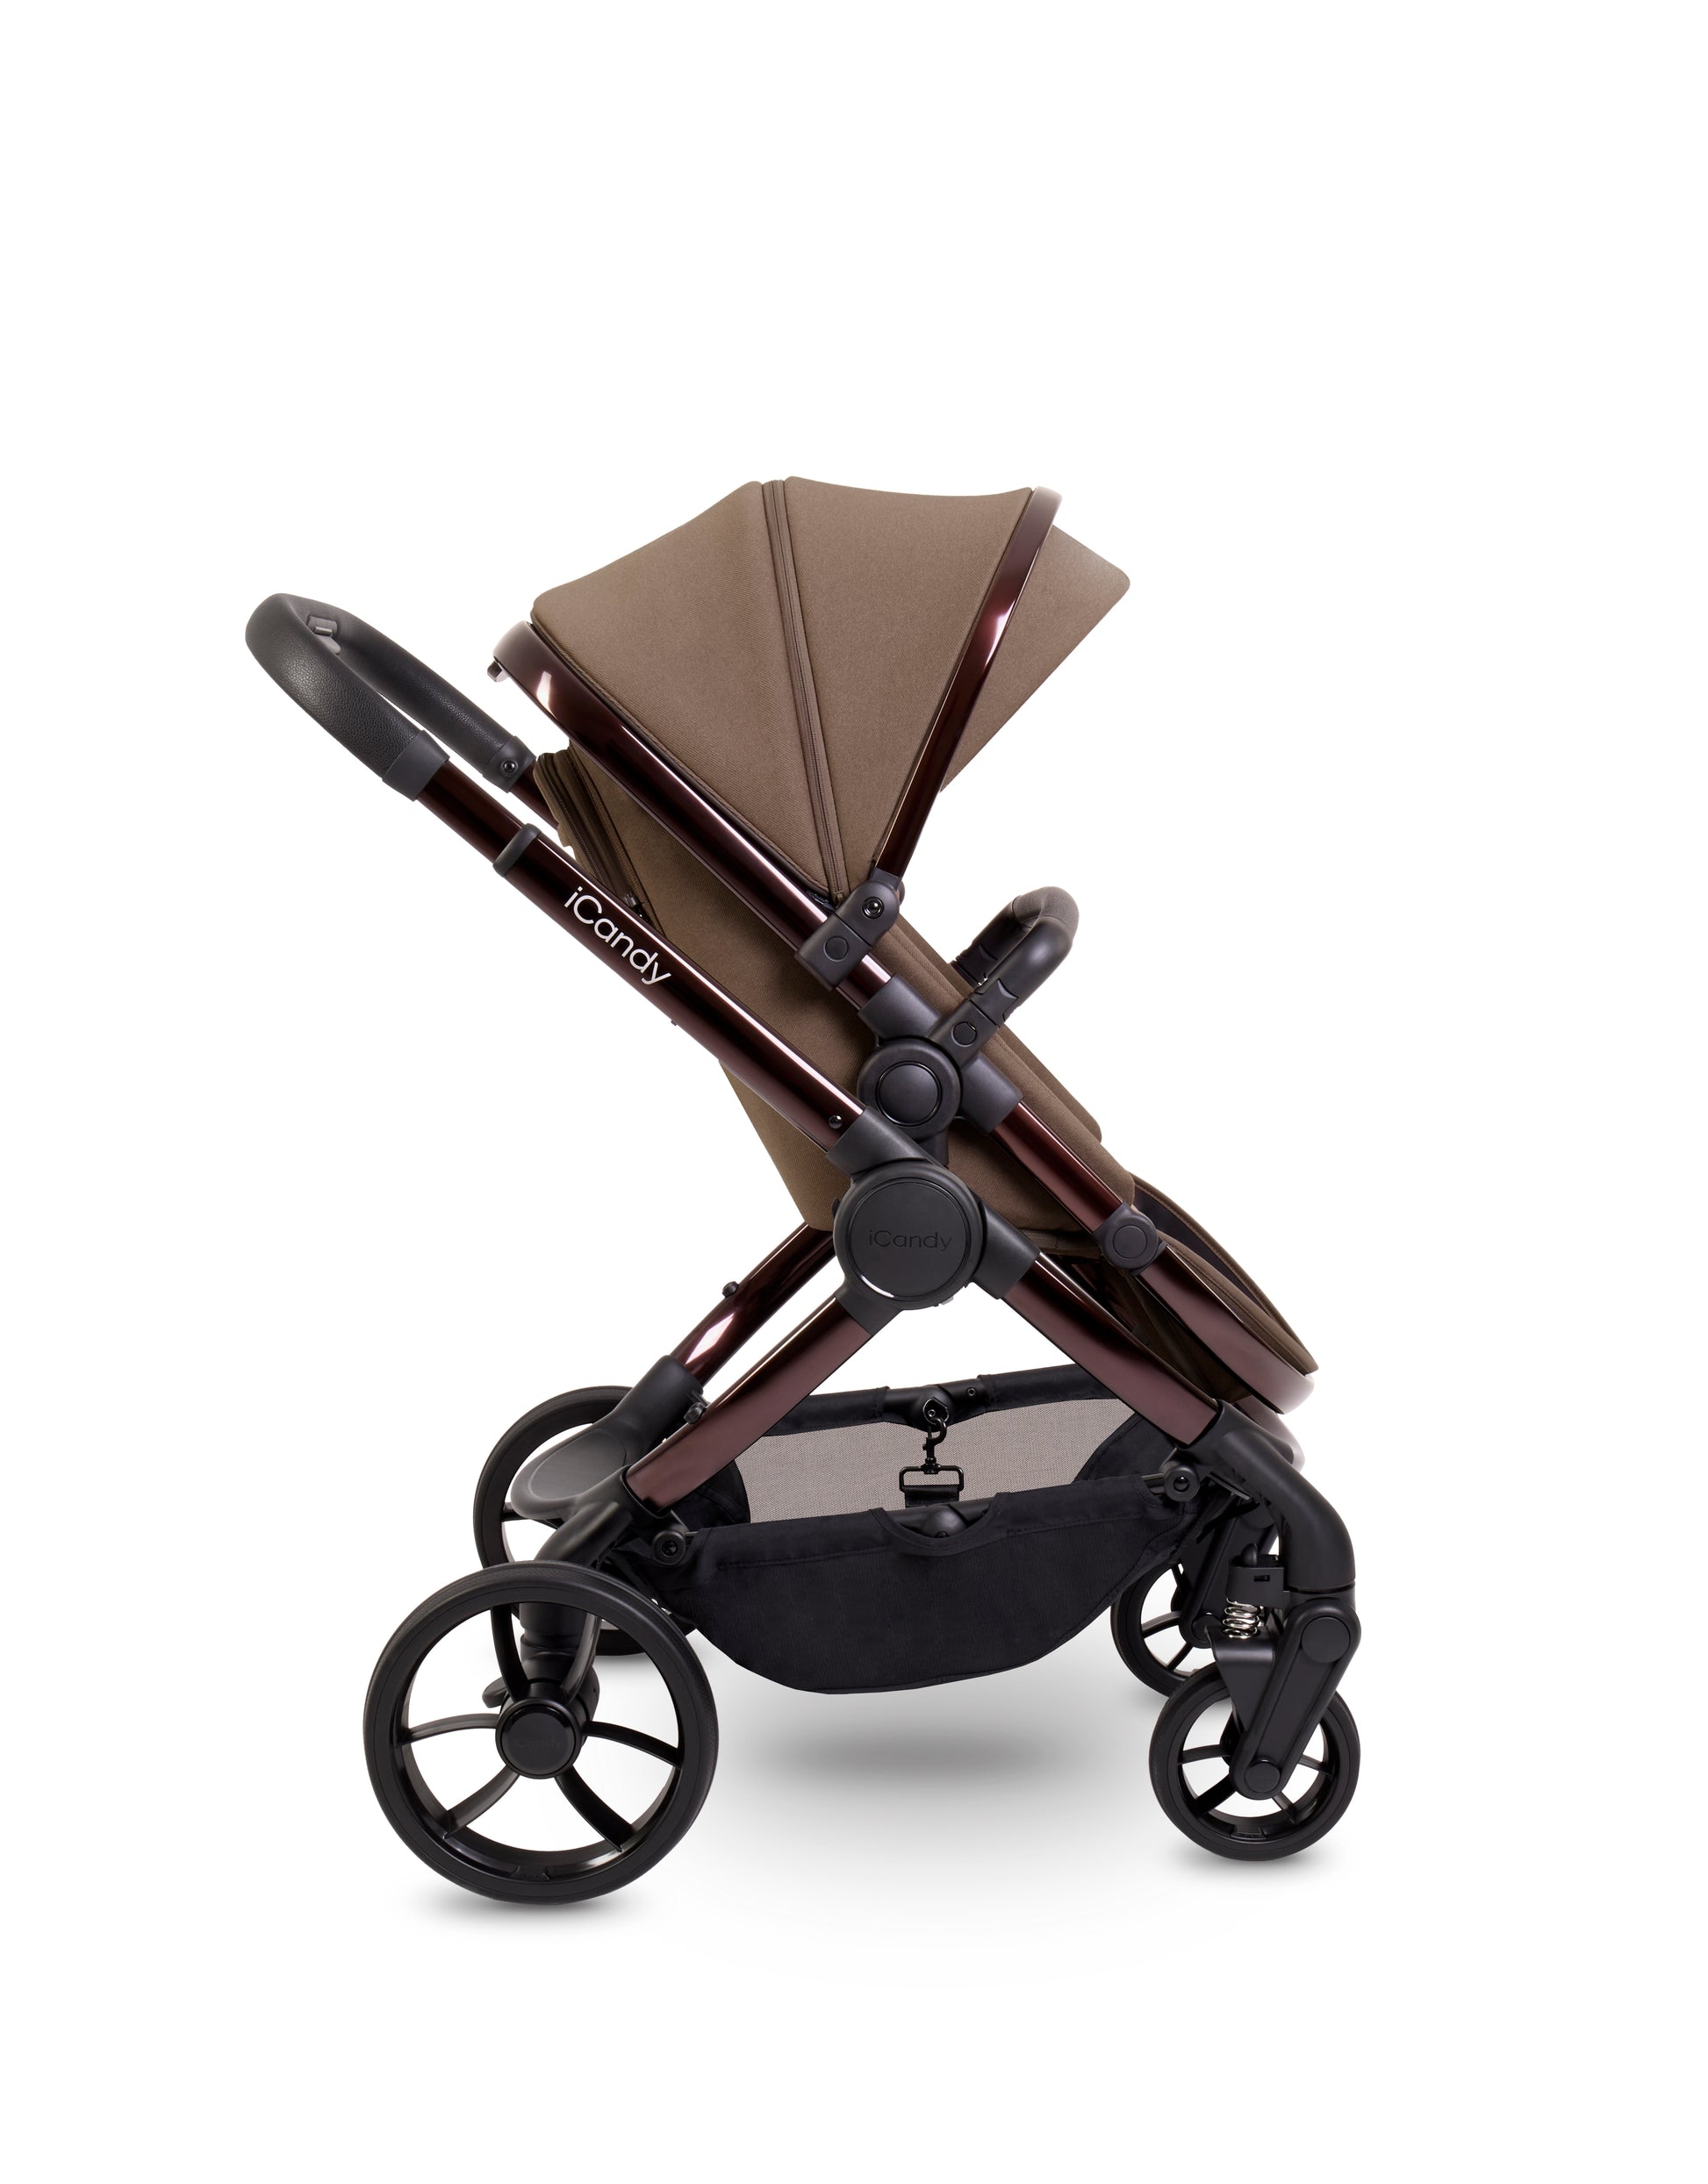 iCandy Peach 7 Pushchair & Carrycot Complete Car Seat Bundle | Coco